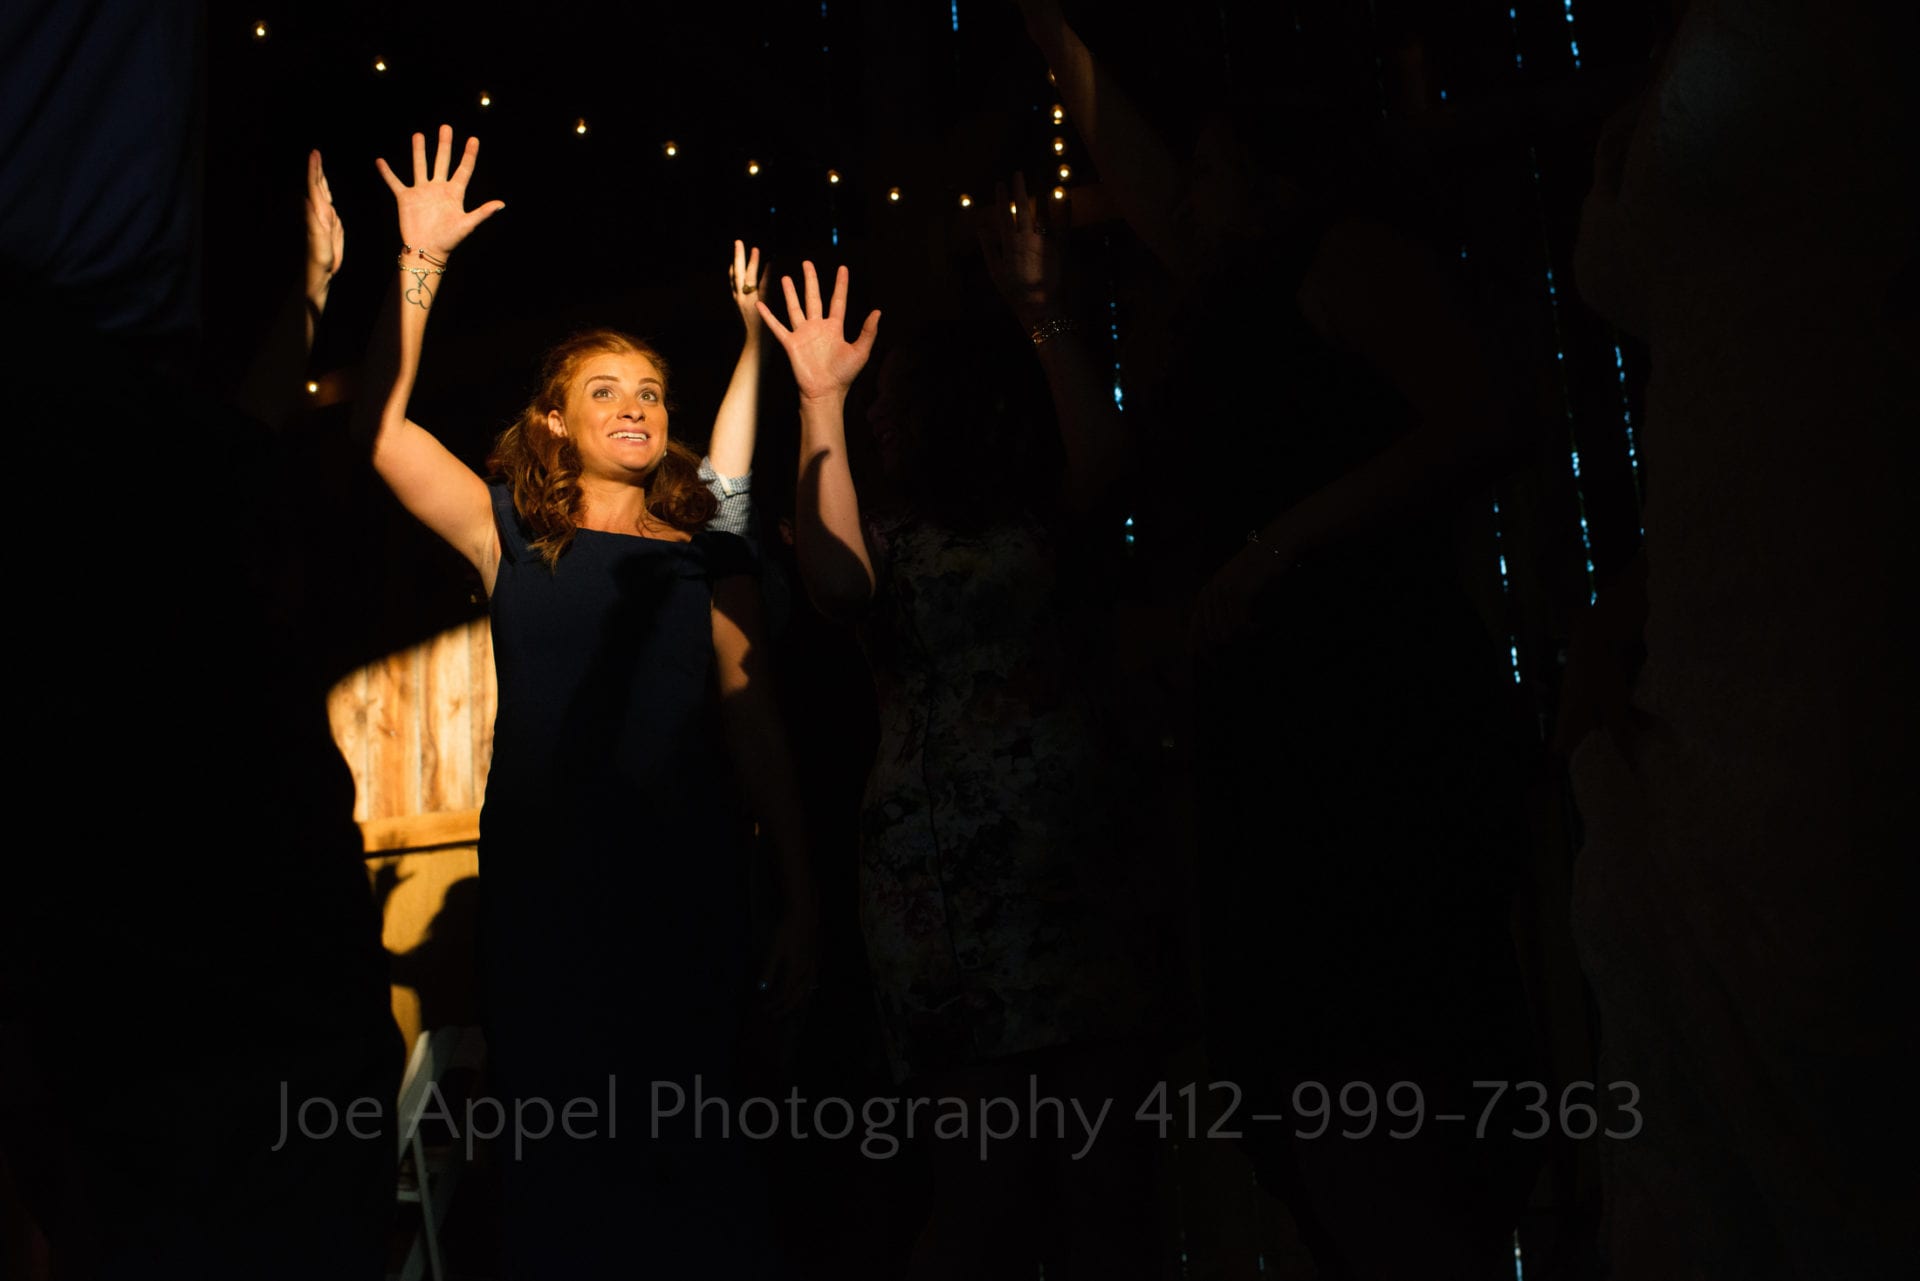 A woman is illuminated by a shaft of golden sunlight while she dances with her hands in the air and her fingers splayed.